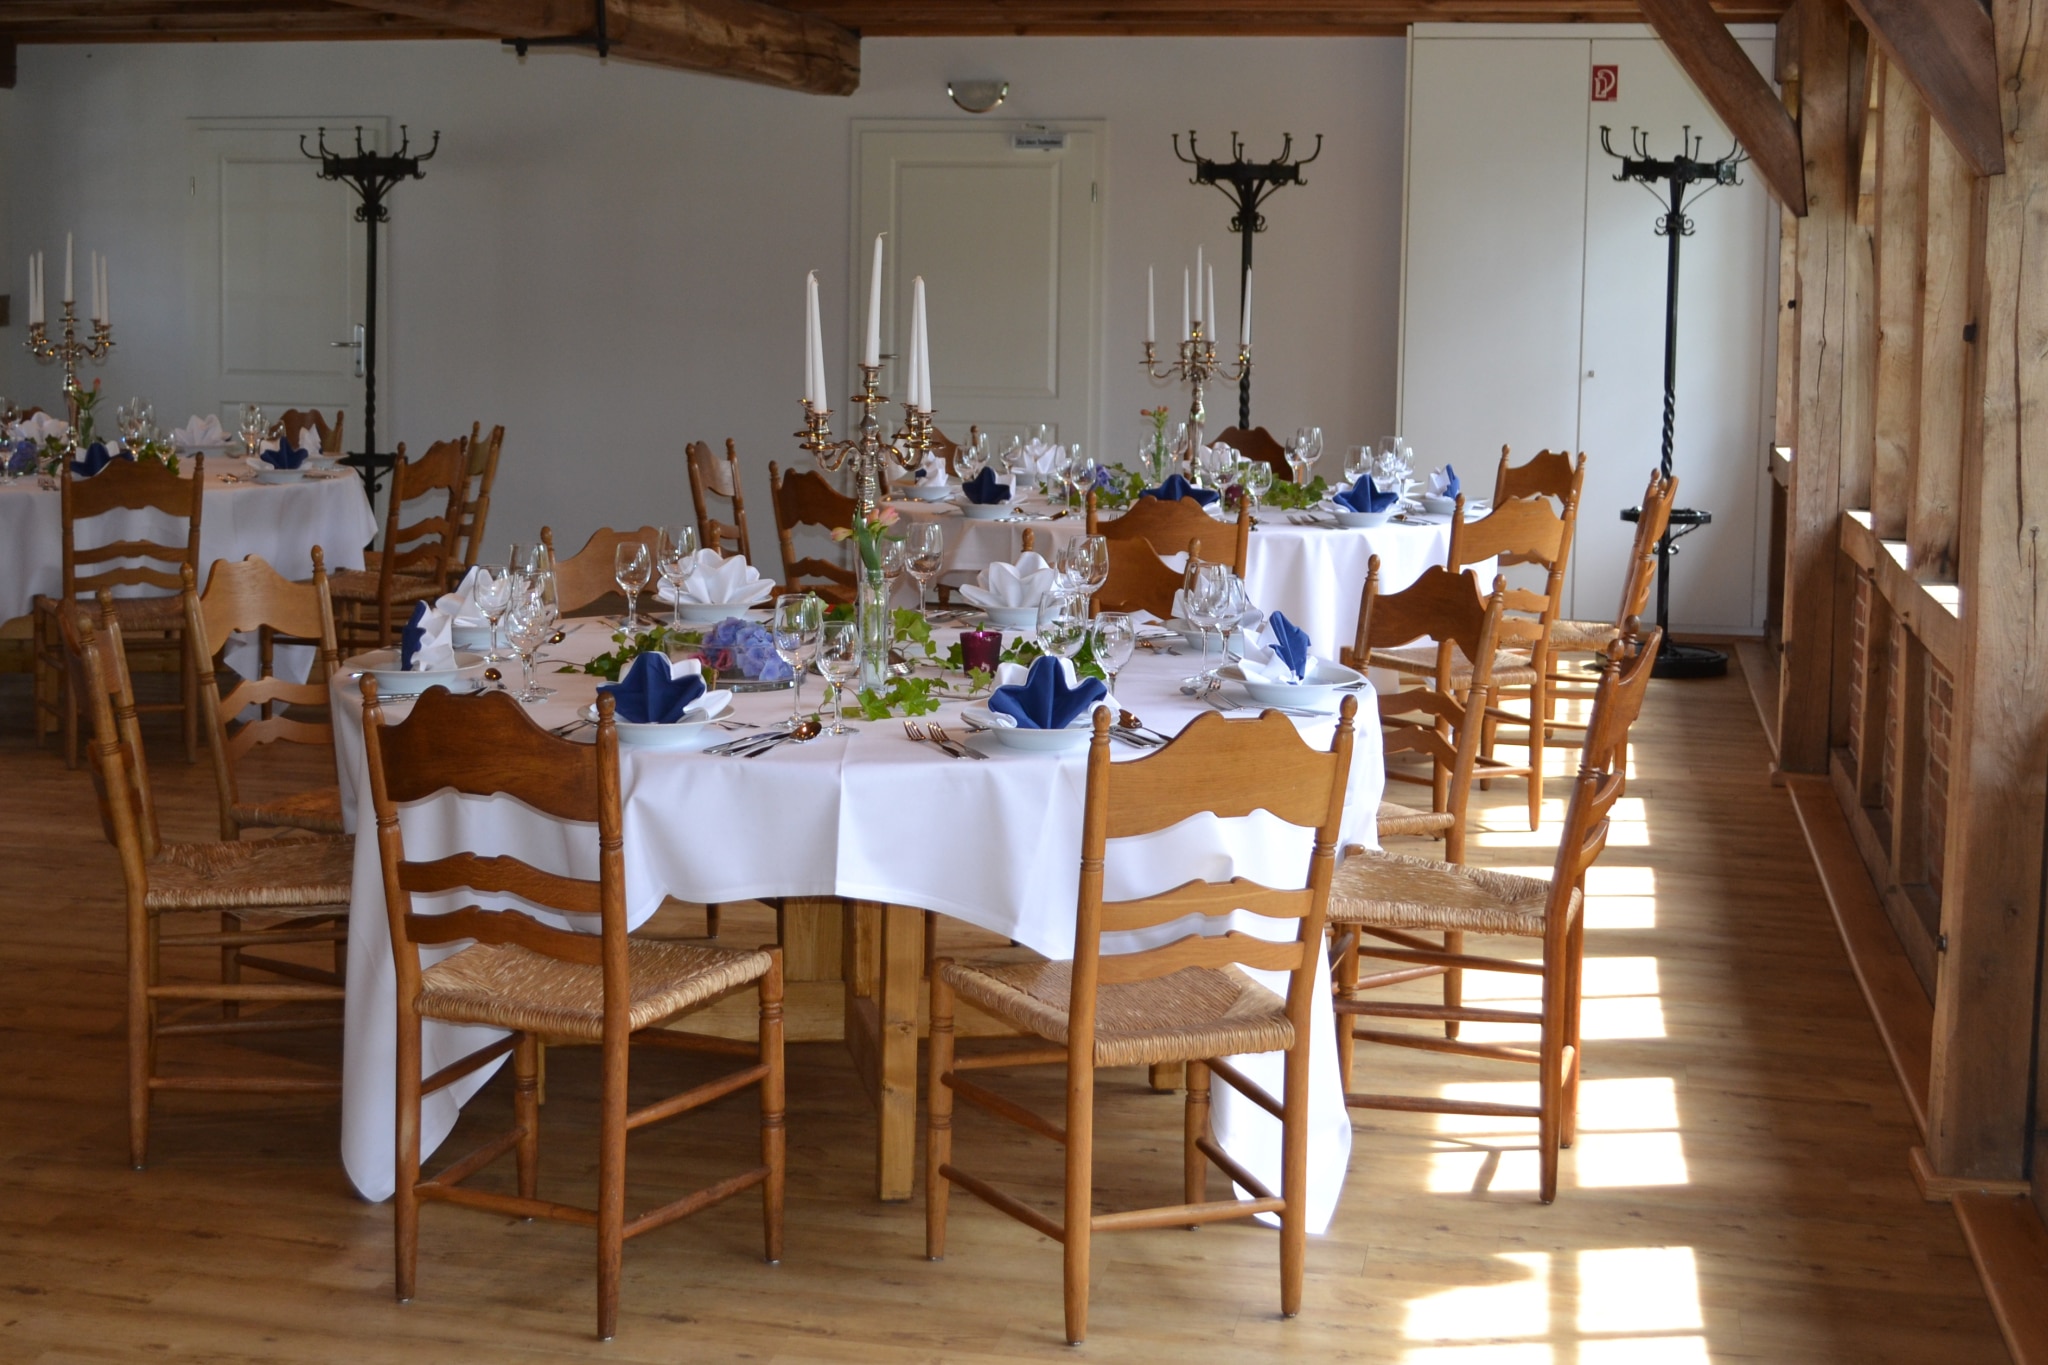 Celebrating at Landhaus Haverbeckhof: Table with blue and white table decorations